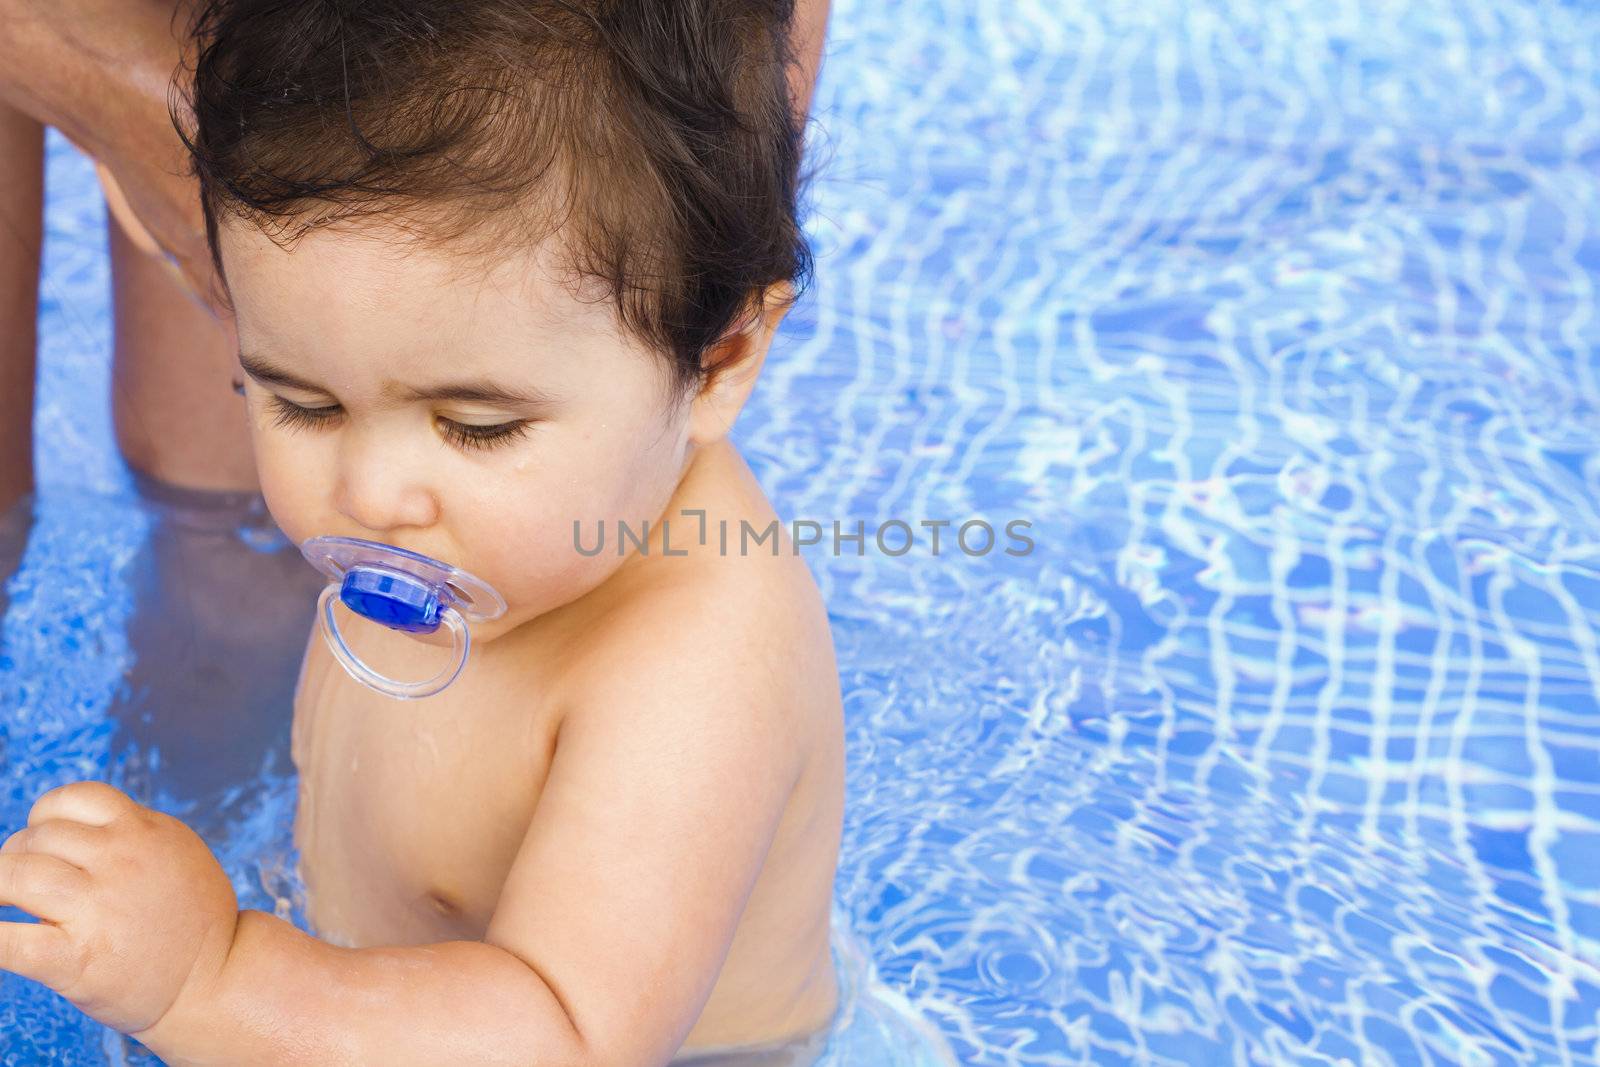 Newborn baby scared of the pool water by FernandoCortes